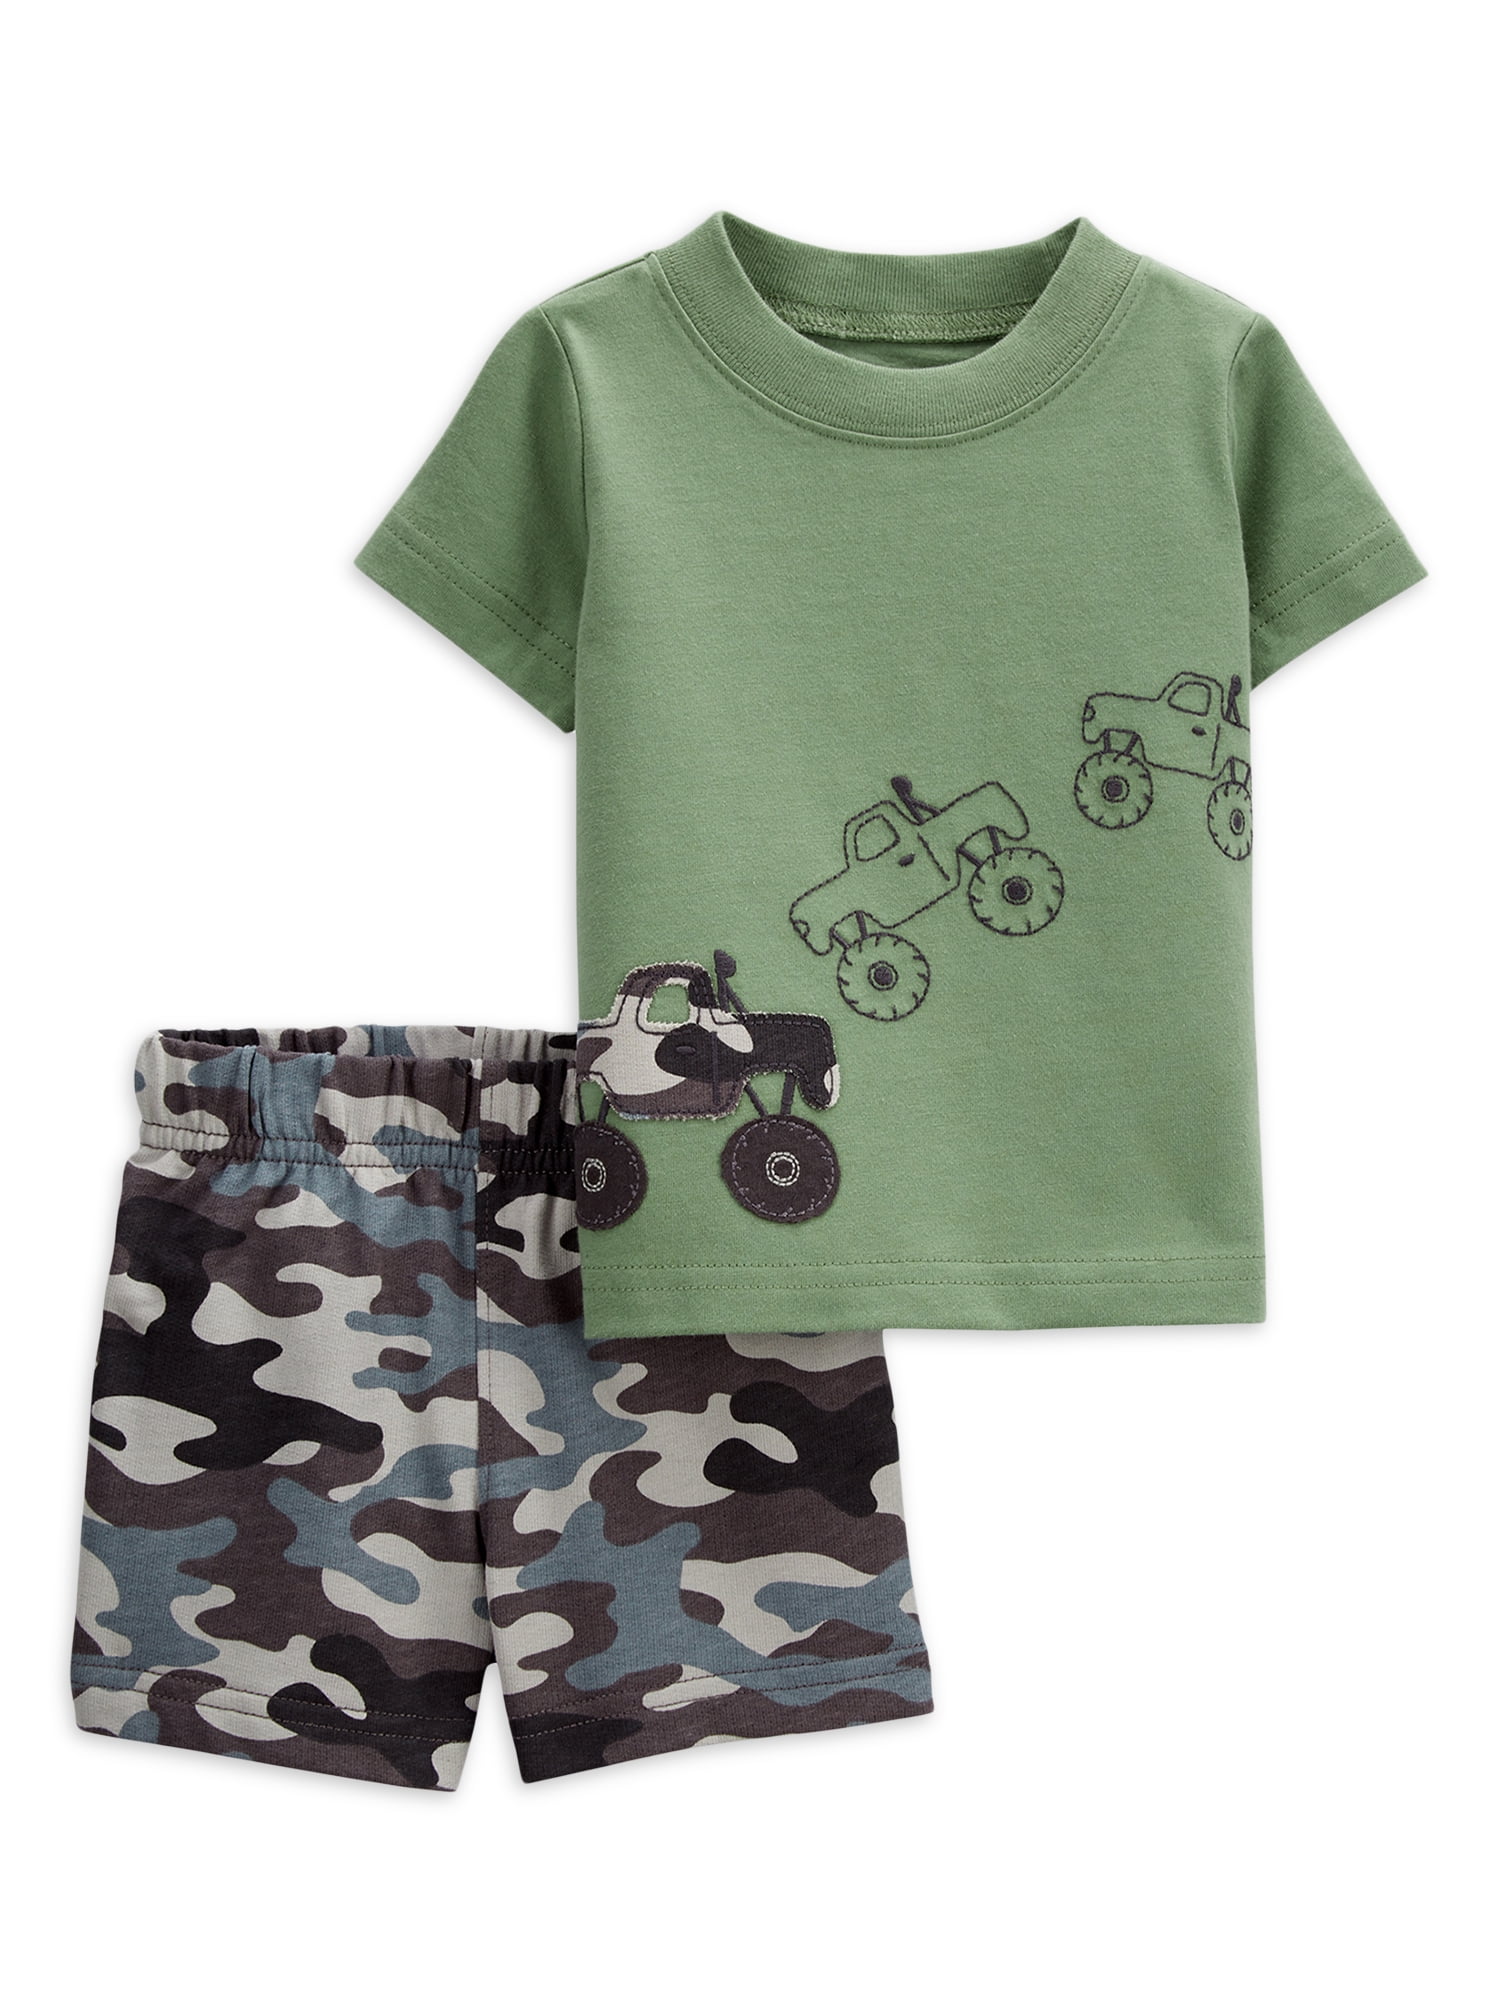 Child of Mine by Carter's - Child of Mine by Carter's Baby Boys Outfit ...